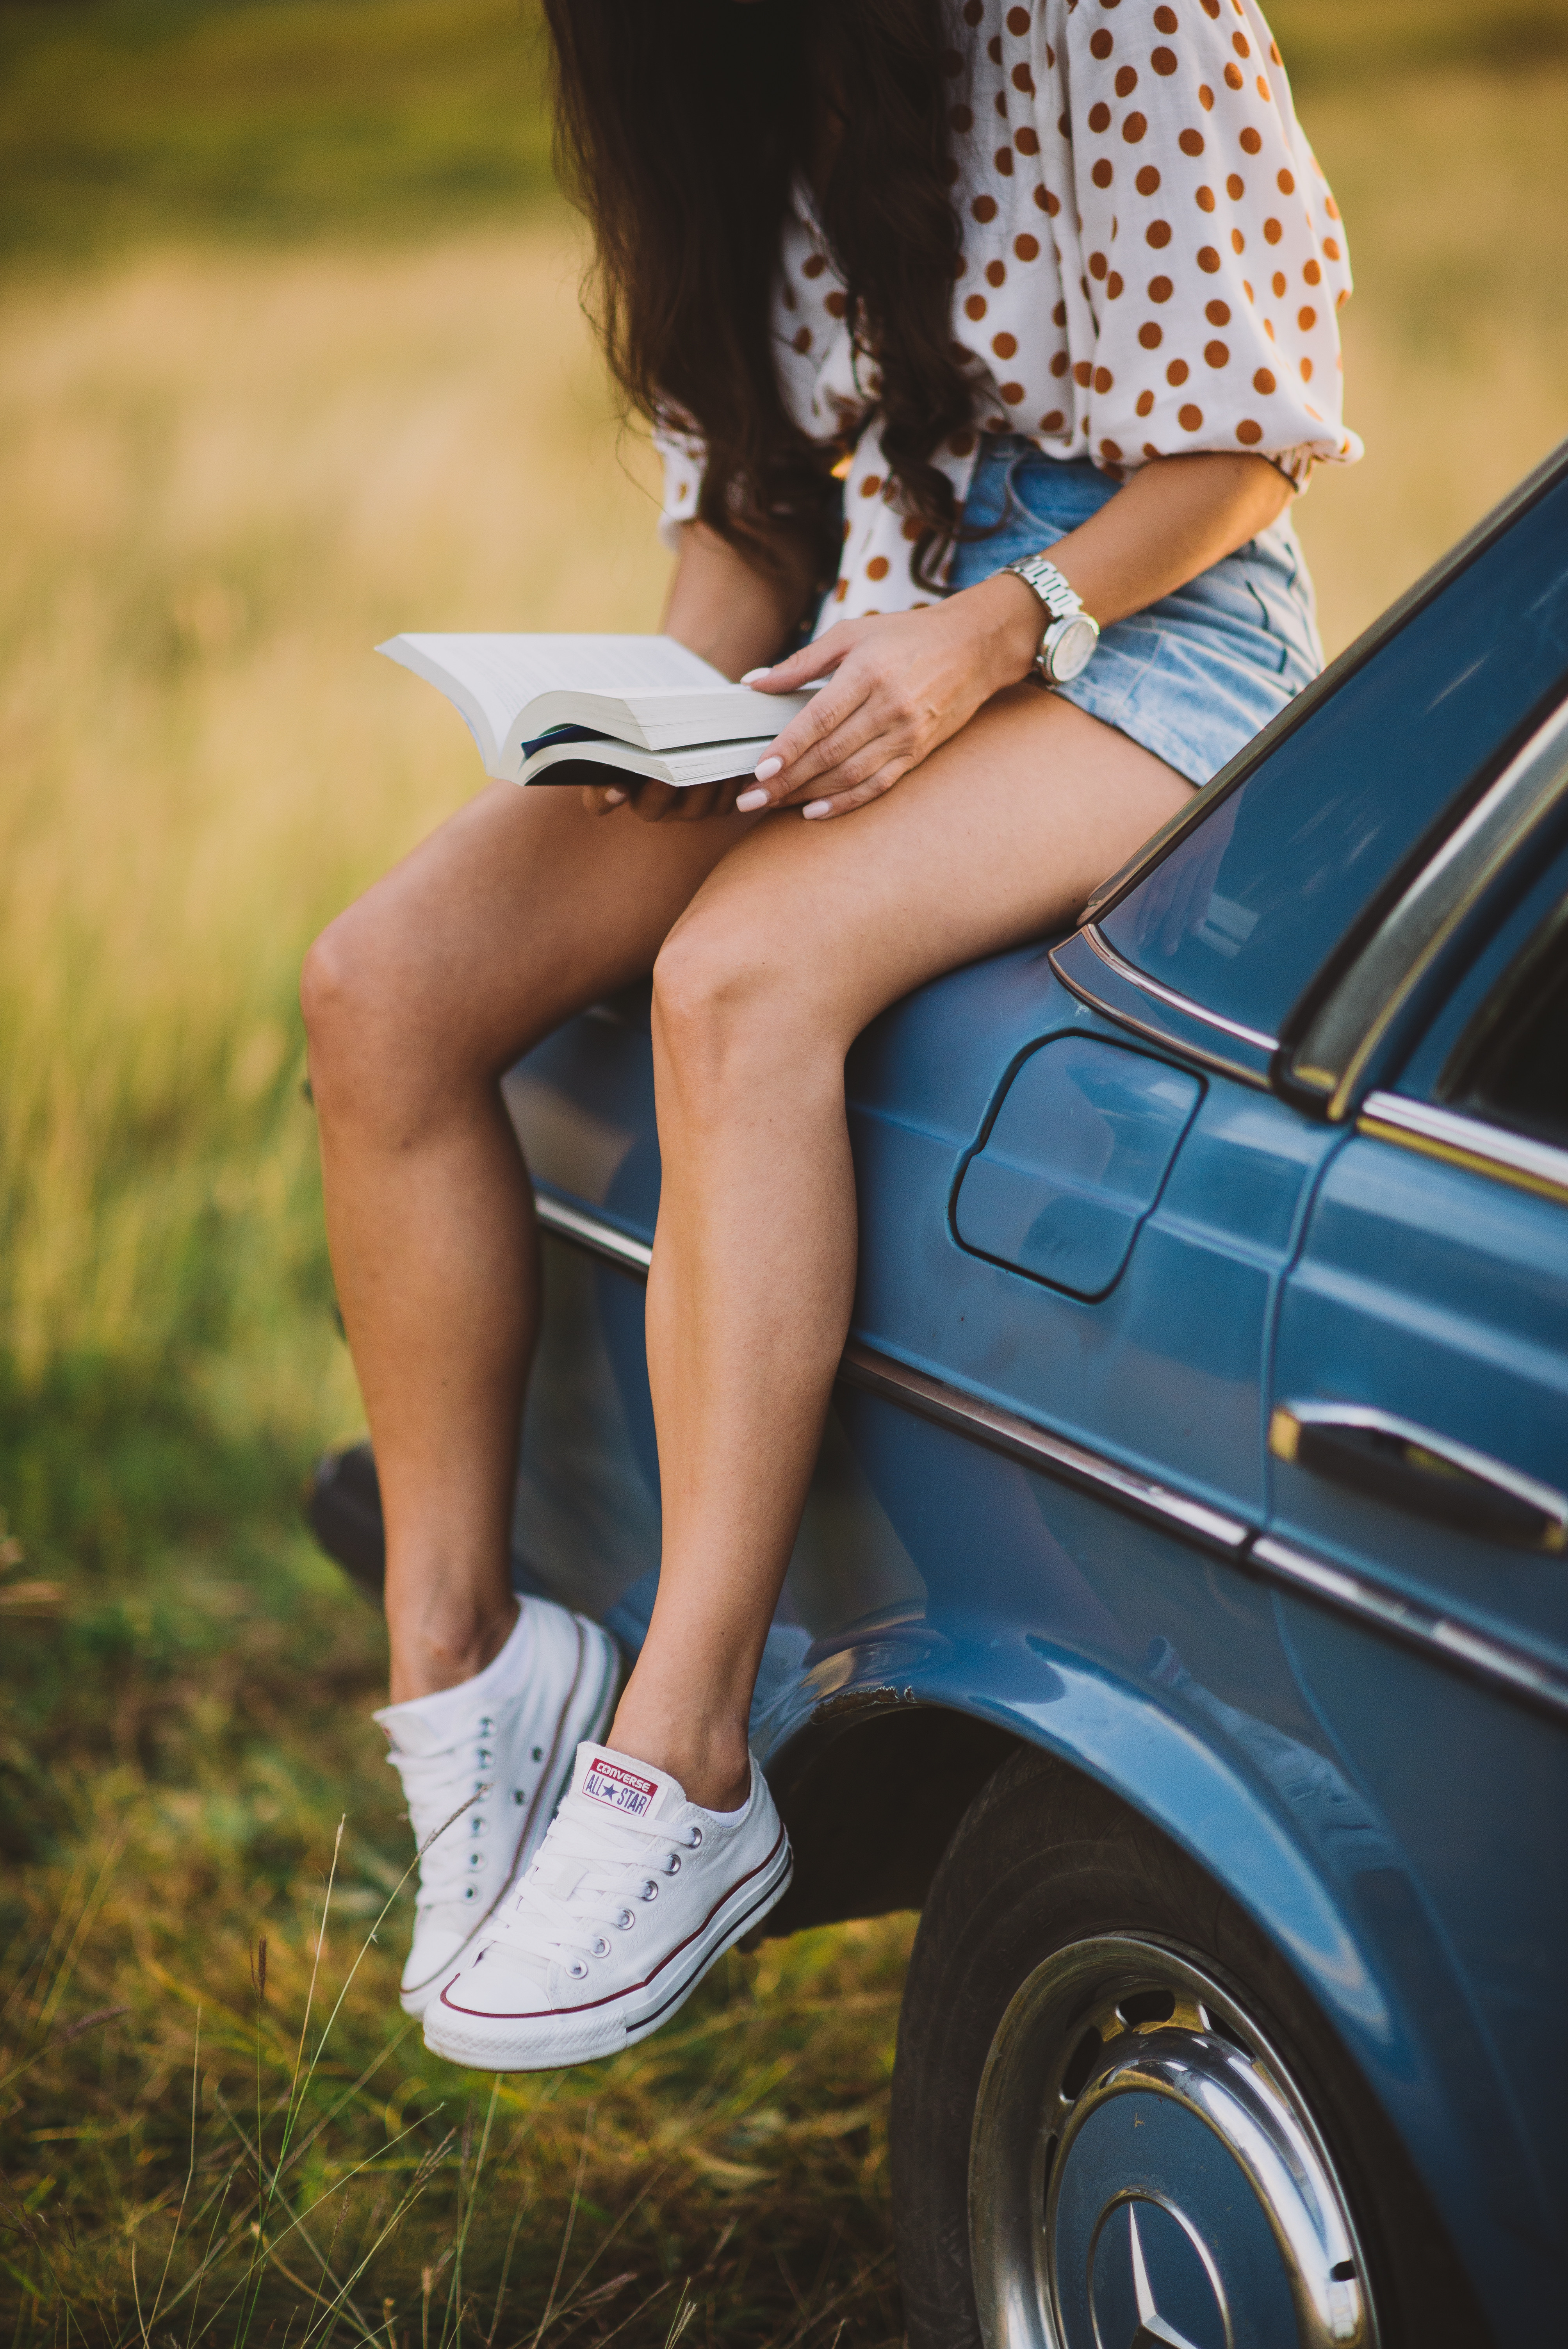 Smartphone Background sneakers, girl, book, miscellaneous